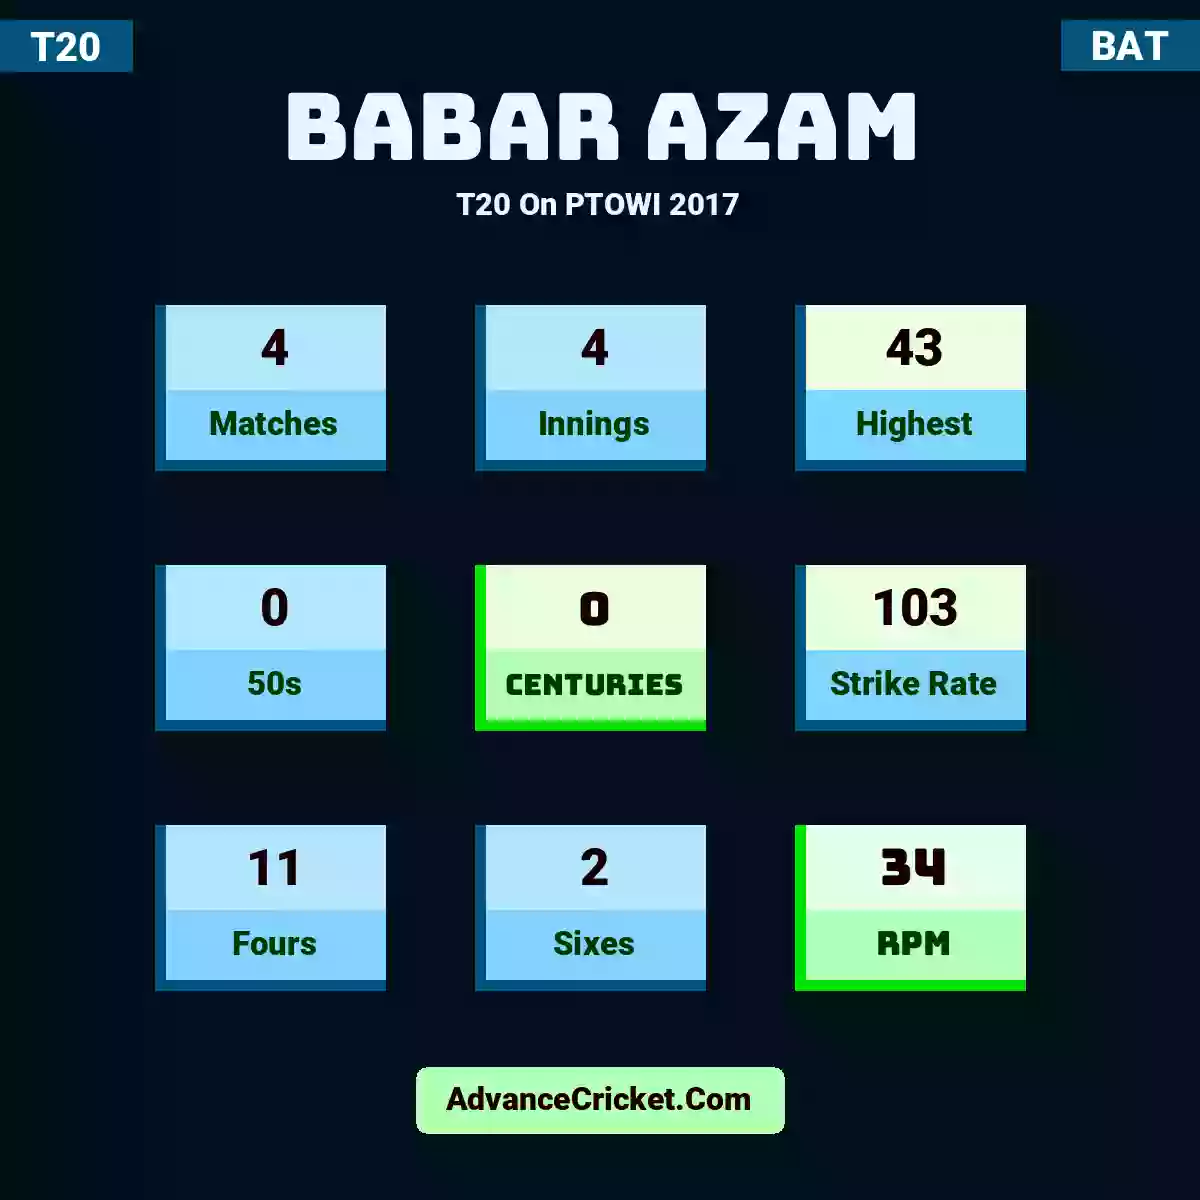 Babar Azam T20  On PTOWI 2017, Babar Azam played 4 matches, scored 43 runs as highest, 0 half-centuries, and 0 centuries, with a strike rate of 103. B.Azam hit 11 fours and 2 sixes, with an RPM of 34.